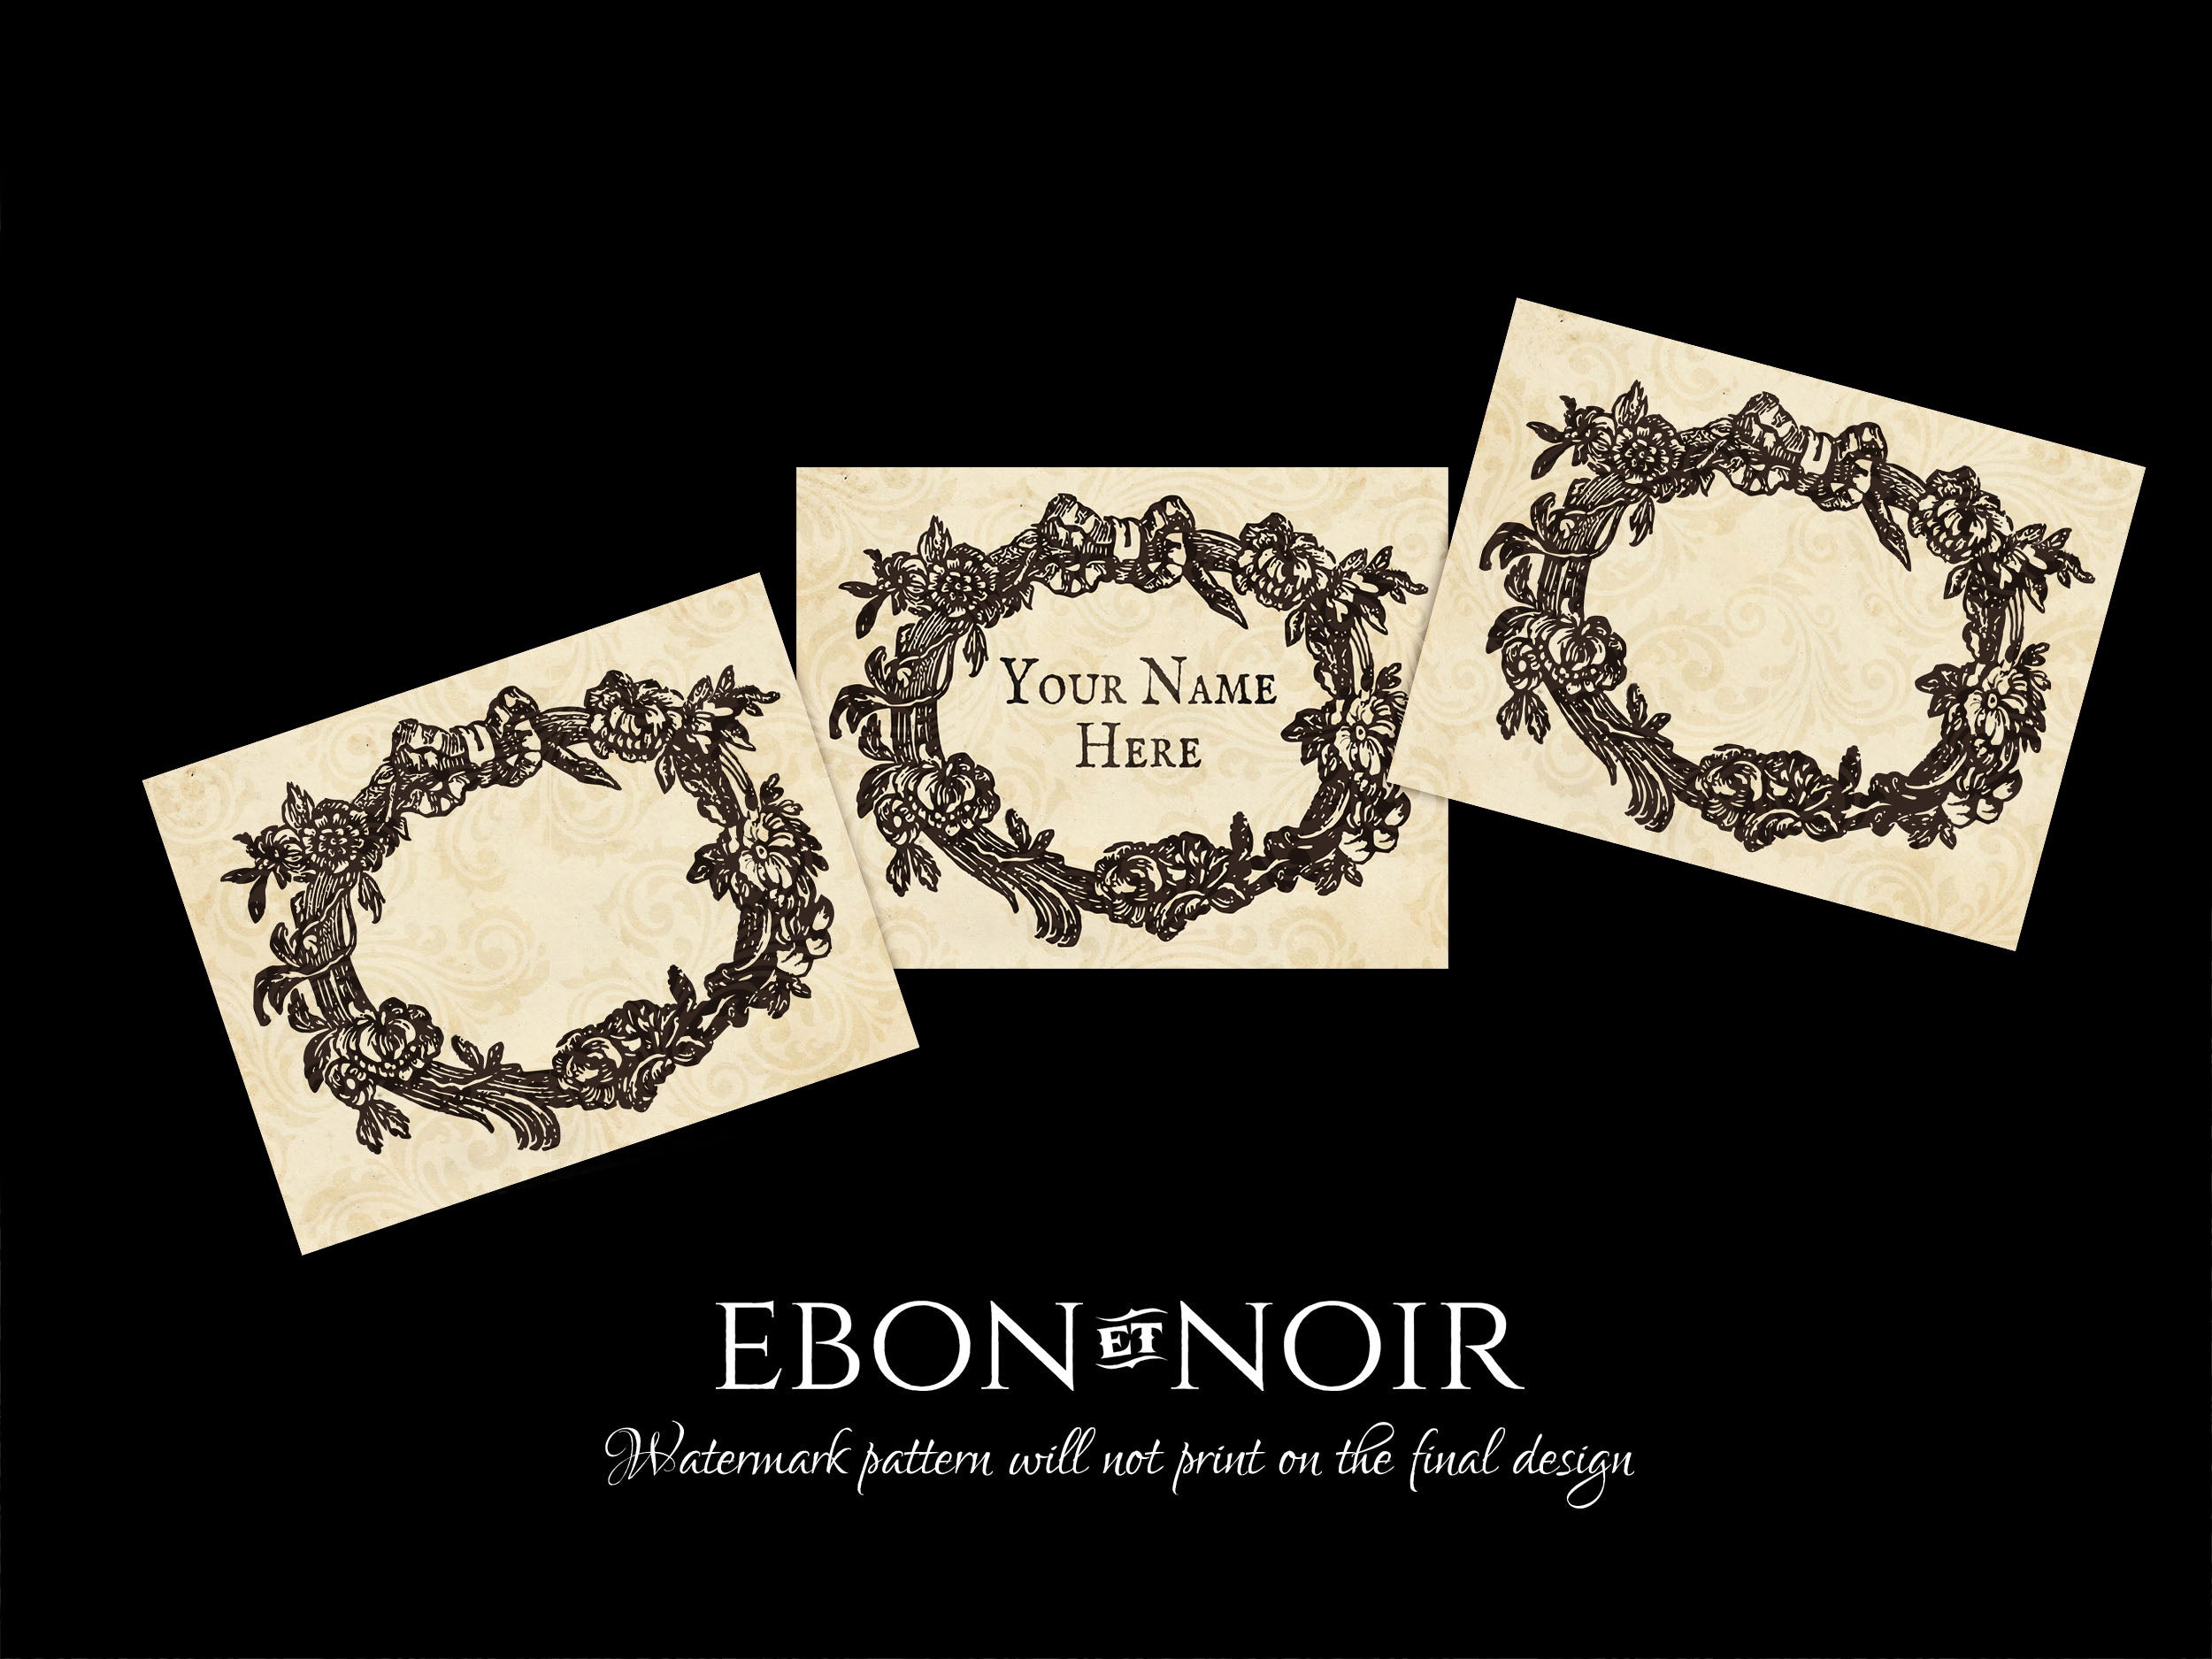 Rose Wreath, Personalized Ex-Libris Bookplates/Labels, Crafted on Traditional Gummed Paper, 3.25in x 2.5in, Set of 30